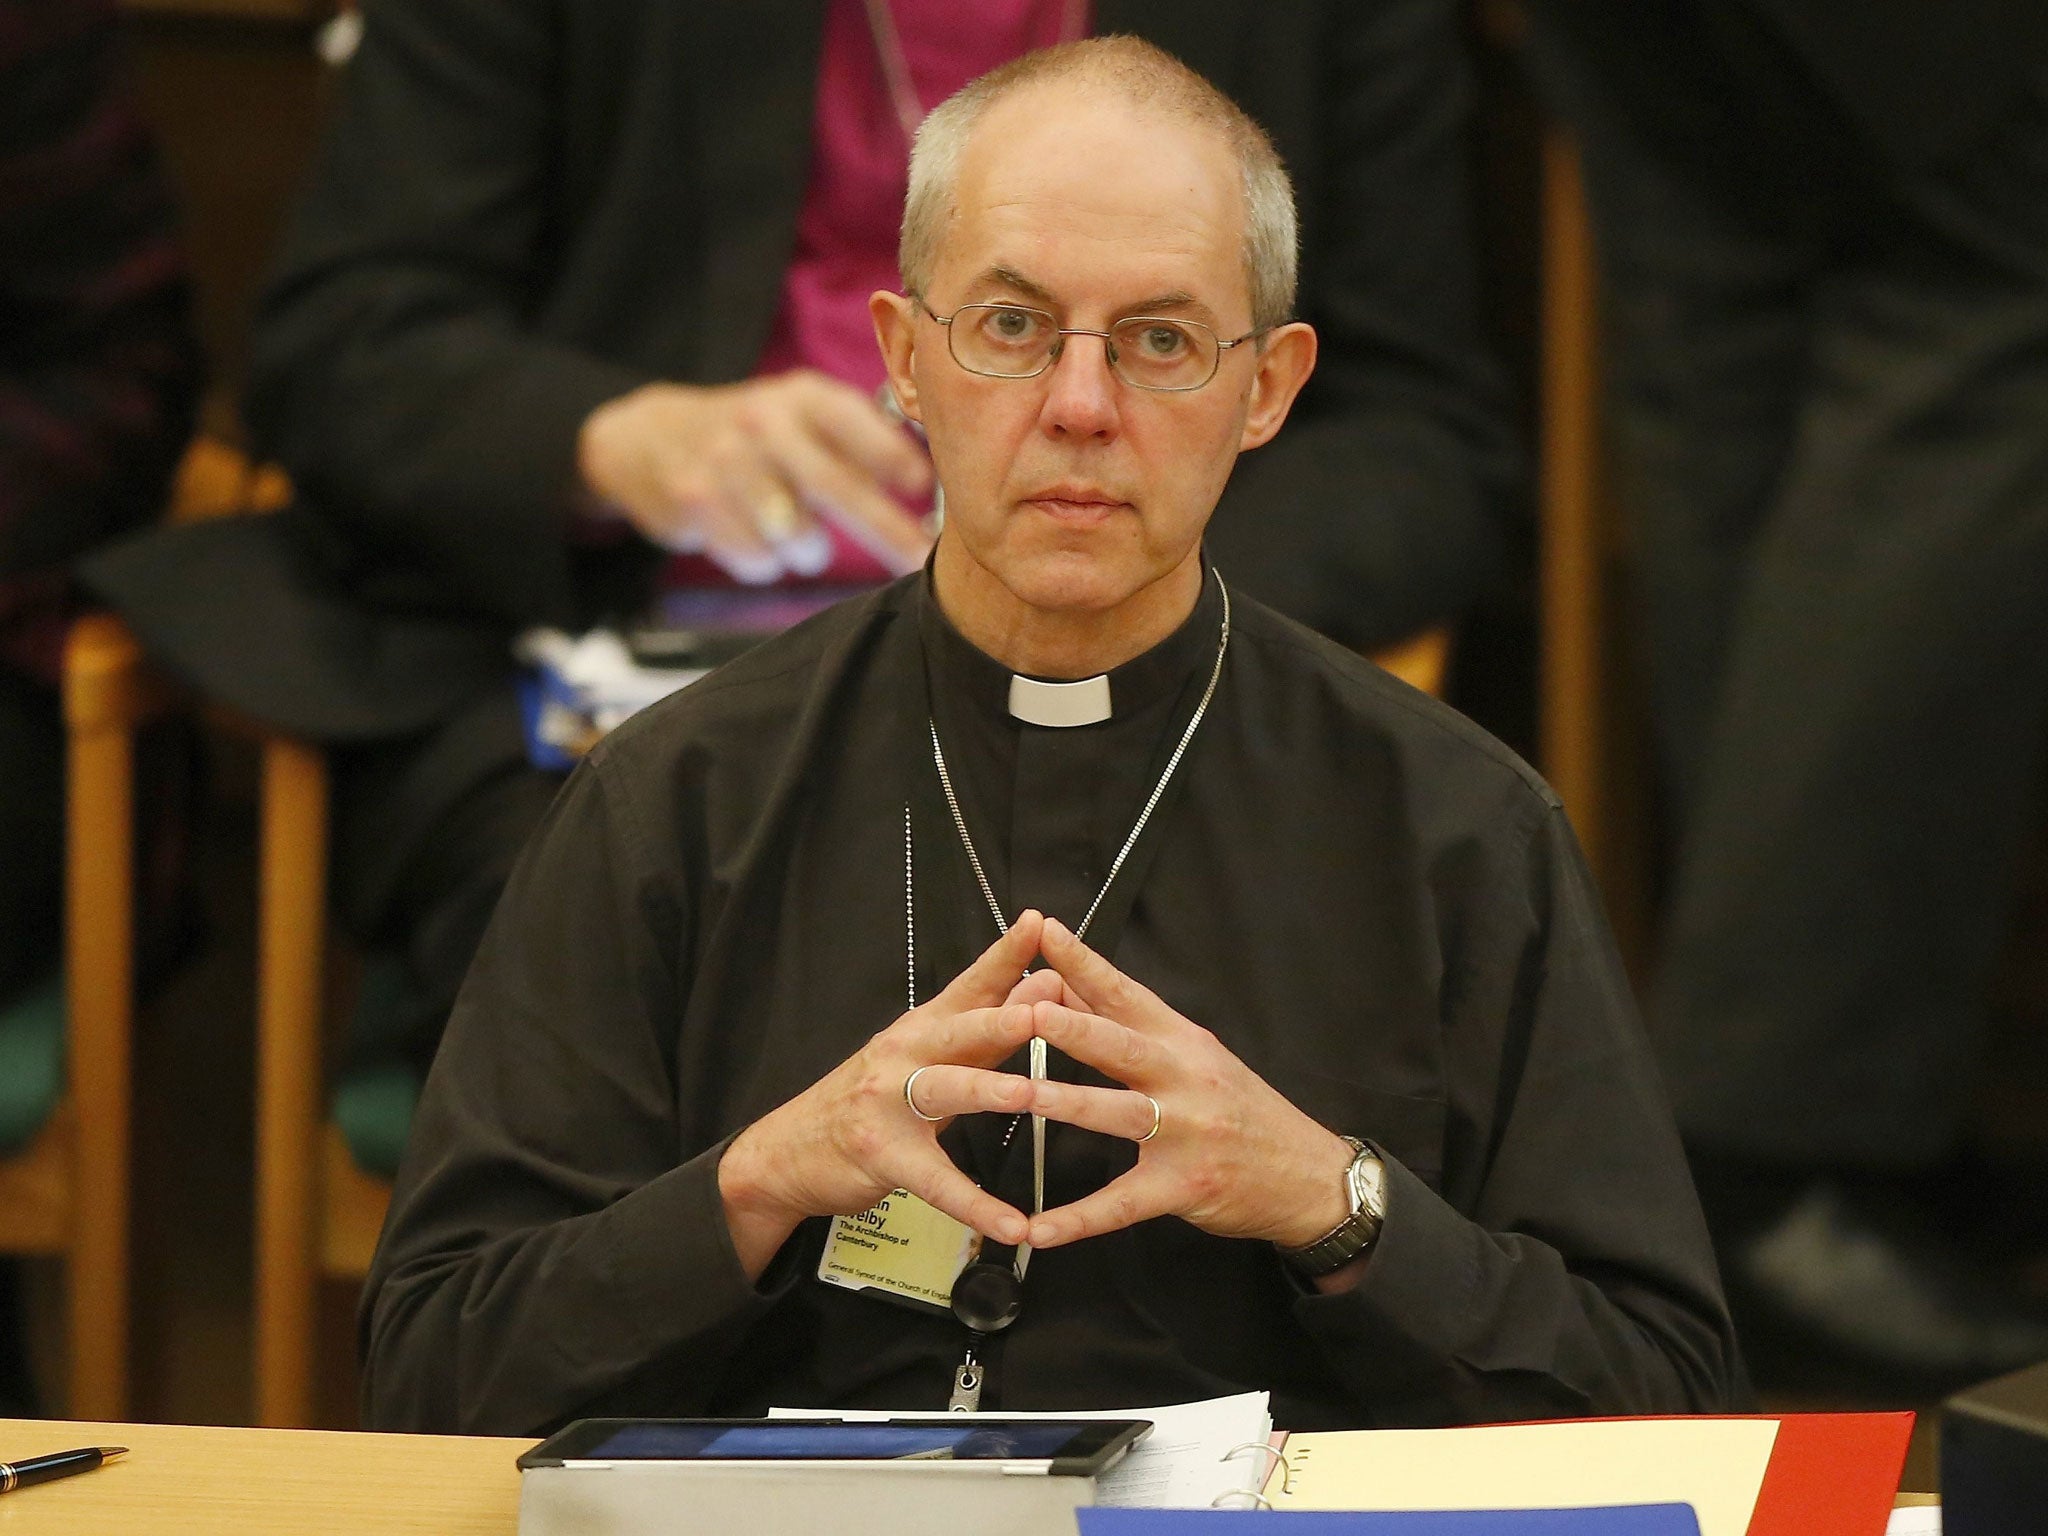 The Archbishop made the comments in a personal address to a General Synod meeting